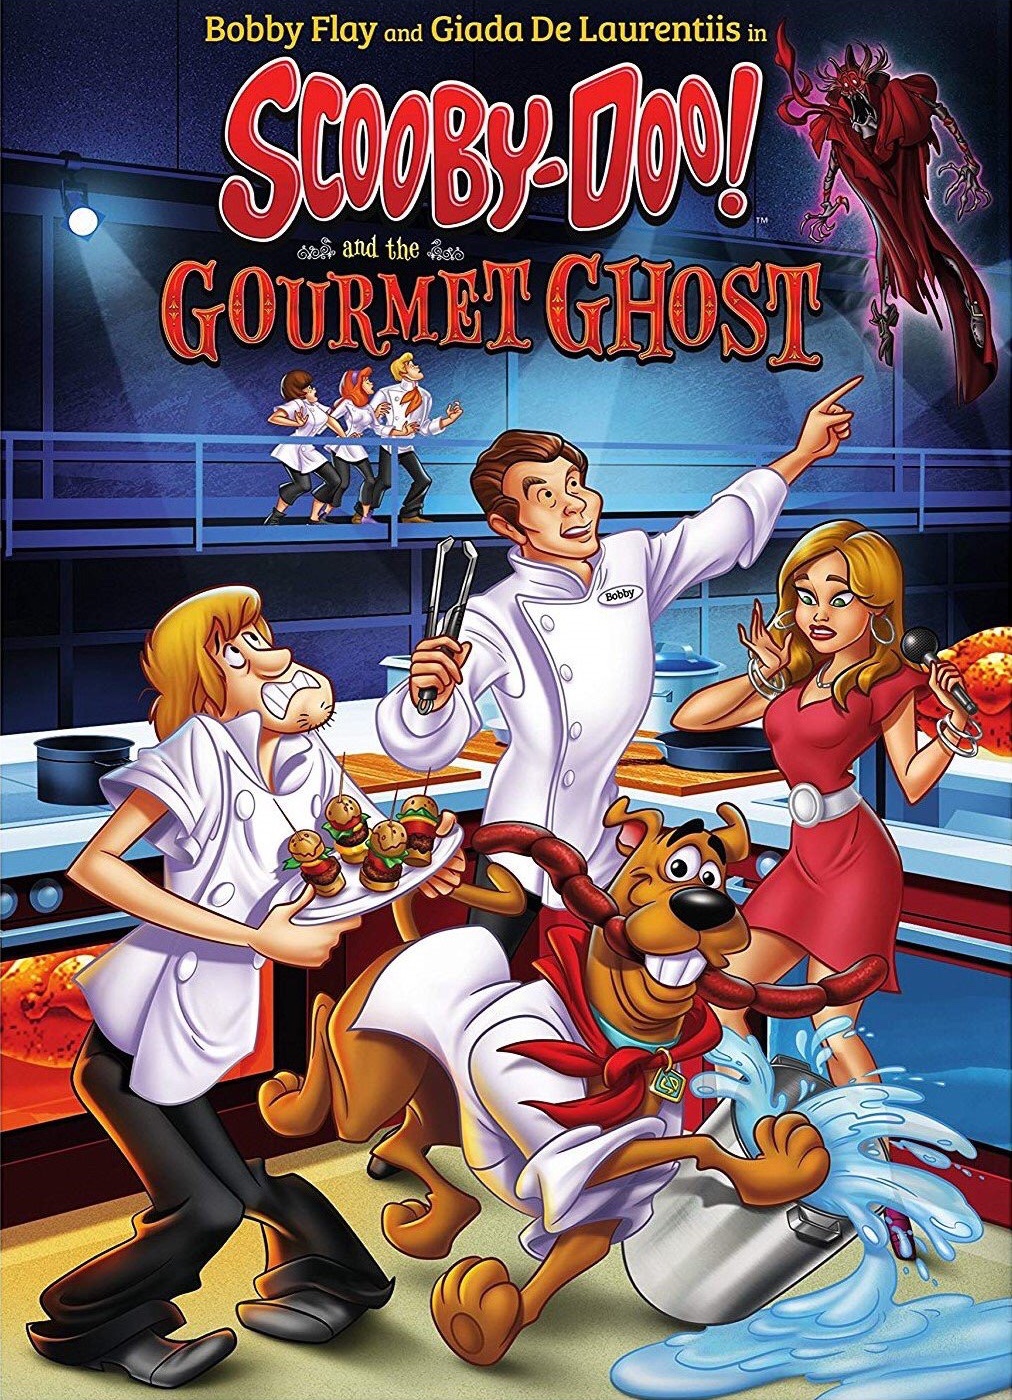 Scooby-Doo! and the Gourmet Ghost (2018) สคูบี้ดู และ หัวป่าก์ ผี Frank Welker